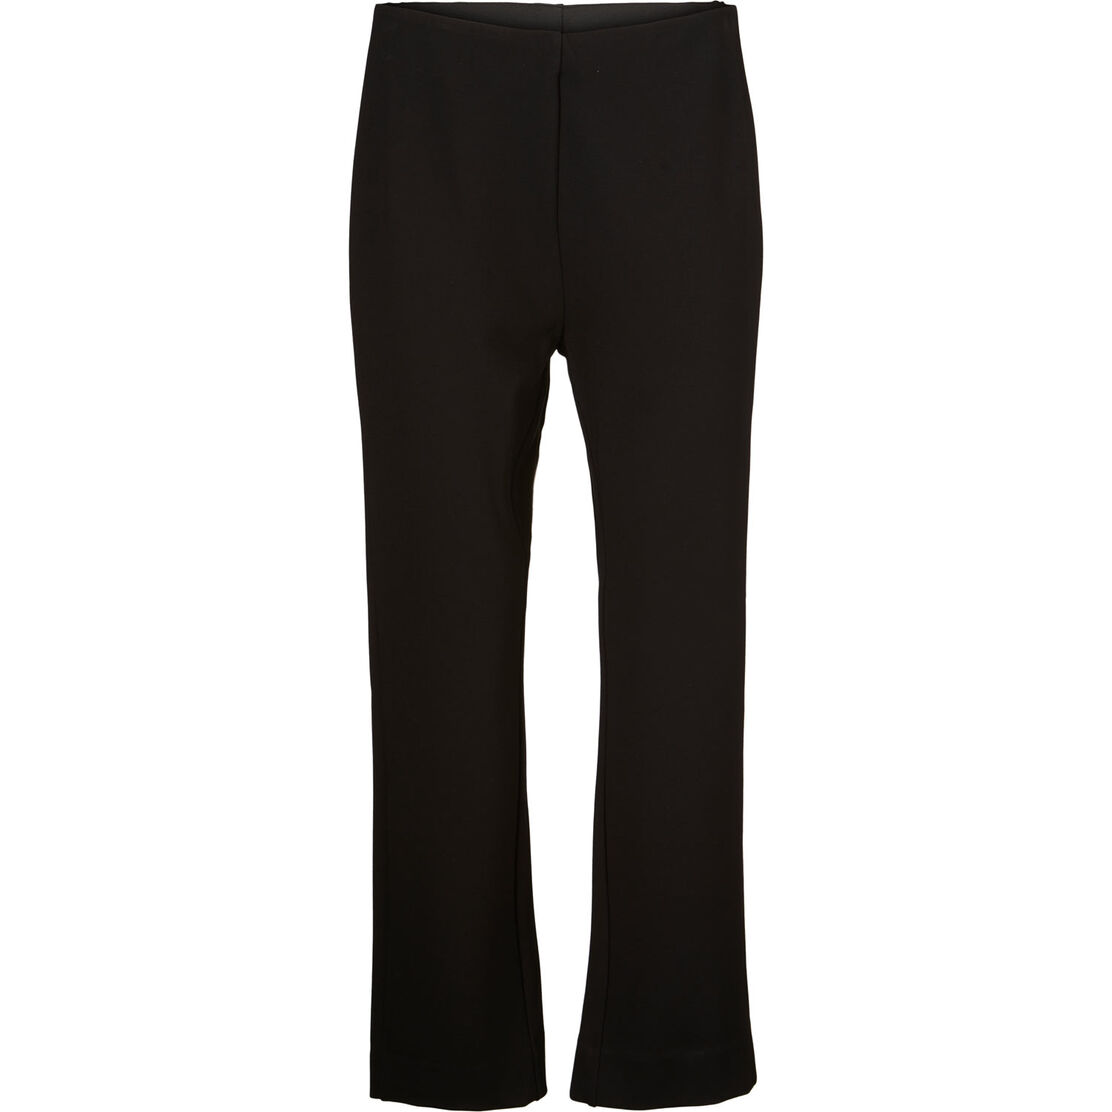 PABA JERSEY TROUSERS, Black, hi-res